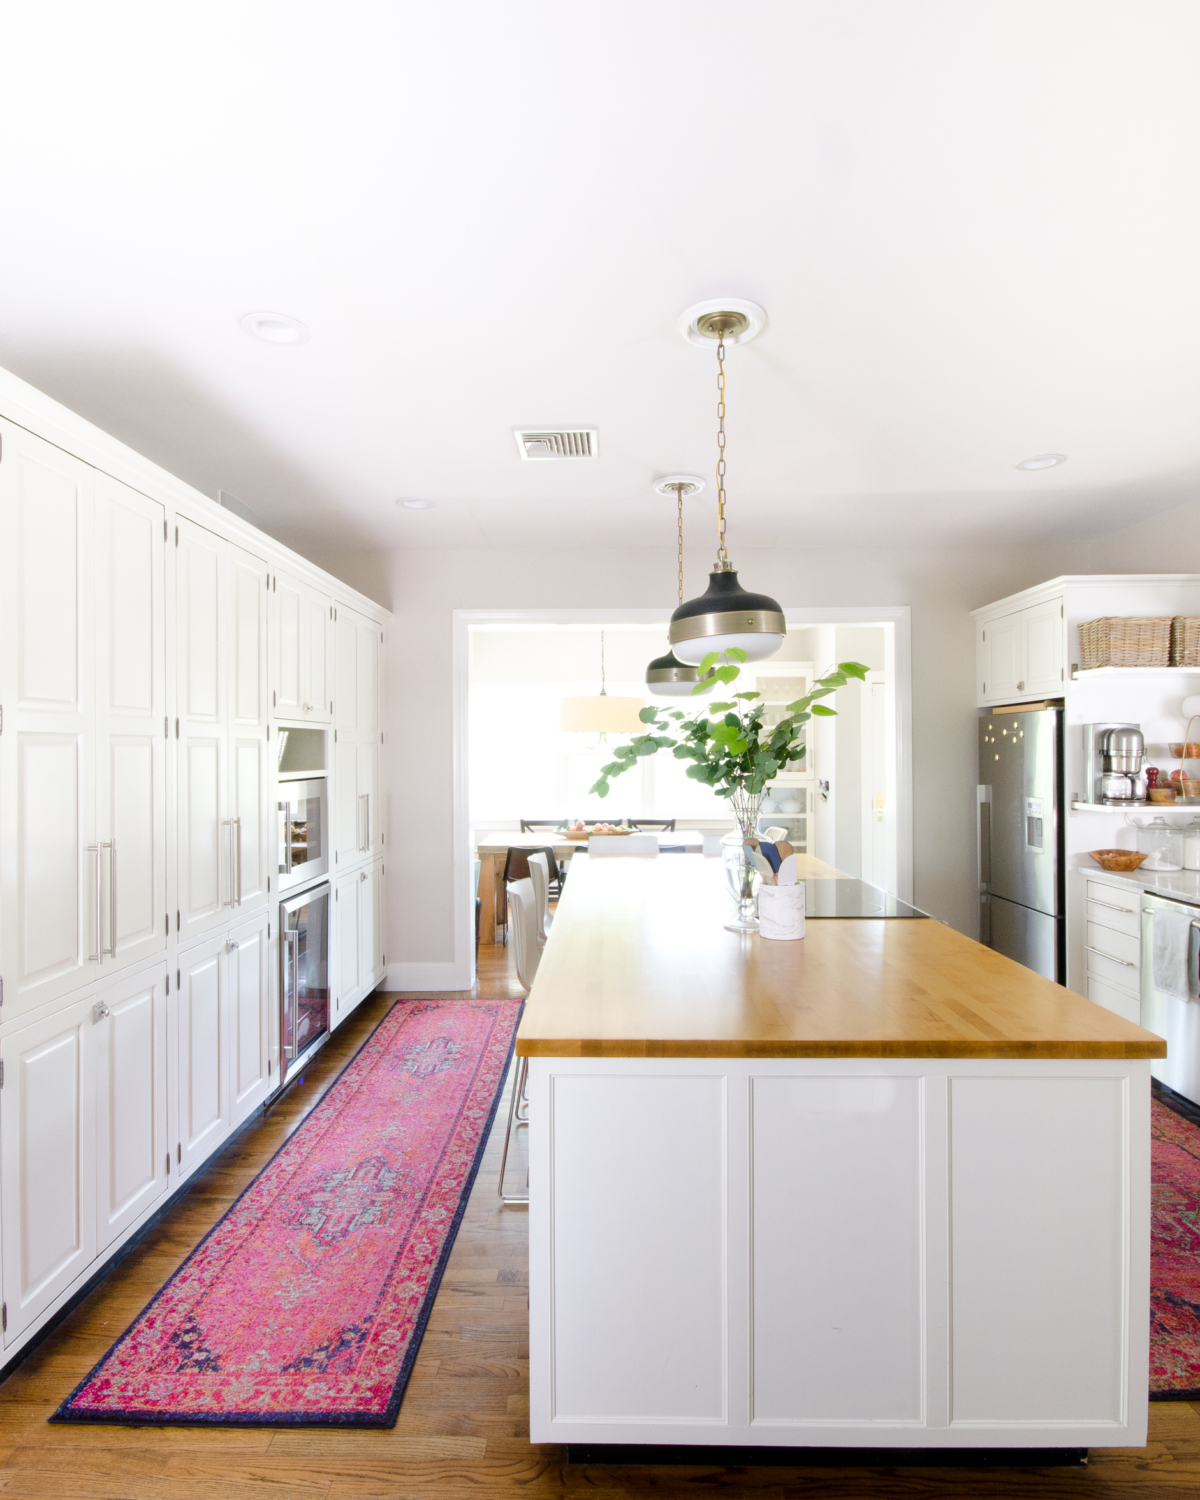 Classic white kitchen with butcher block counter and pendants similar to the Hicks pendant but way more affordable! Transom windows divide the kitchen and family room. Perimeter counter is quartzite that looks like marble!